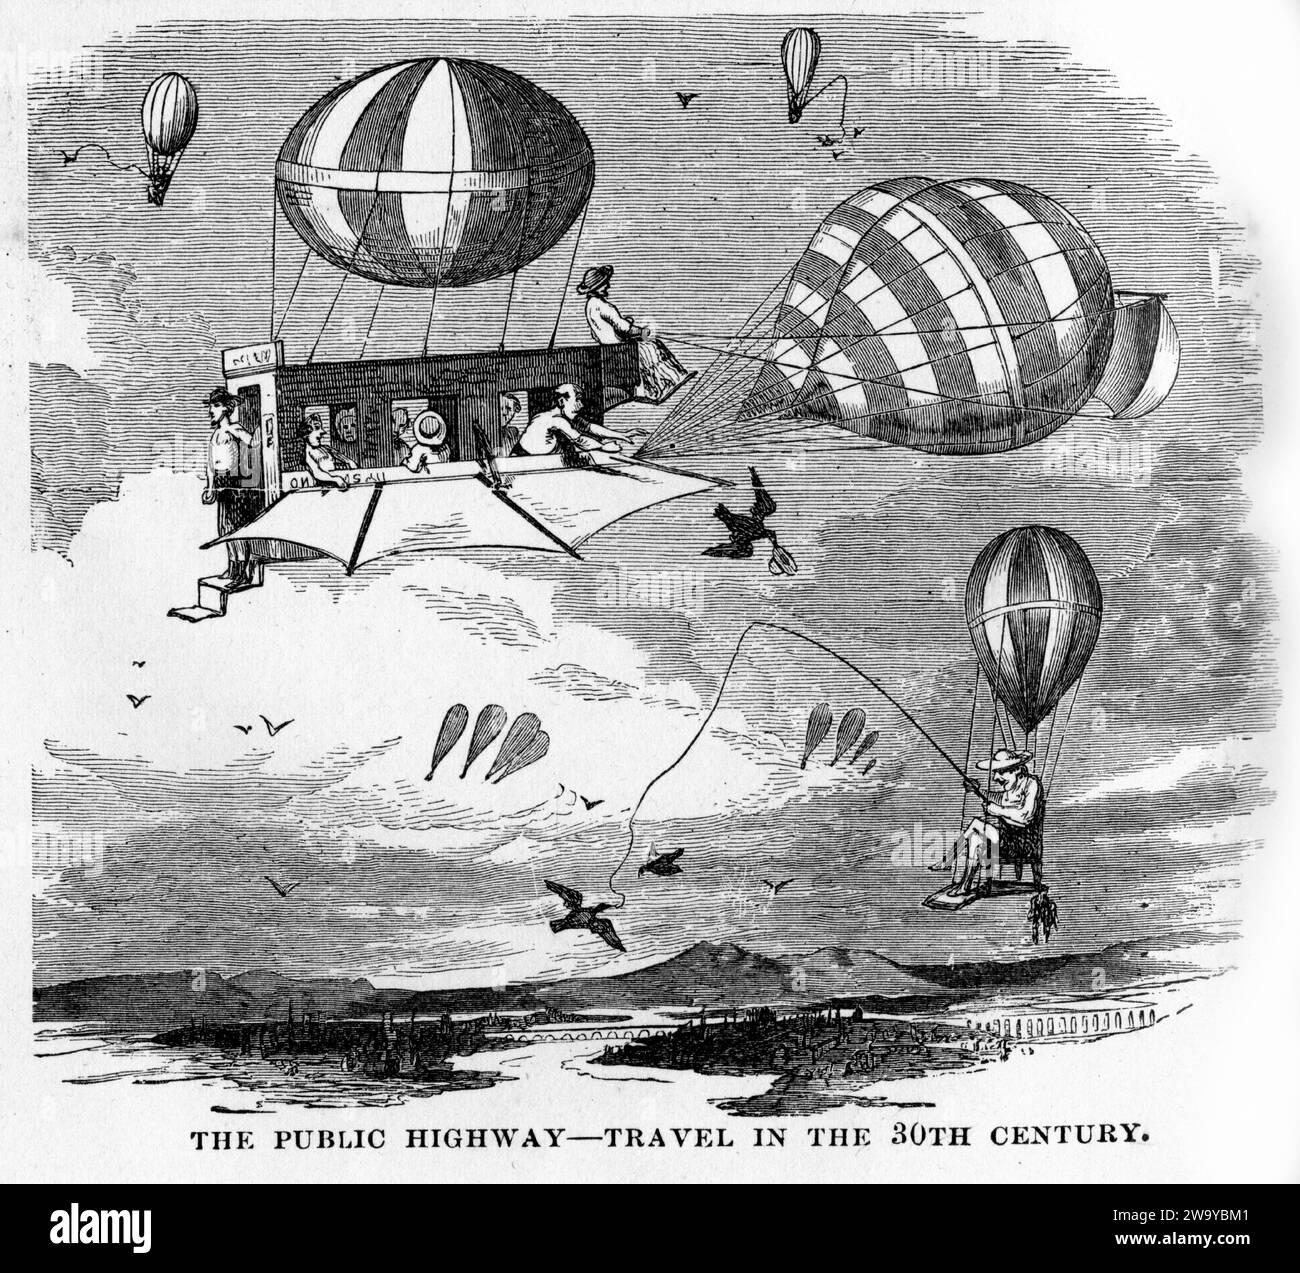 Engraving of predicted travel methods in the 30th century, circa 1878 Stock Photo